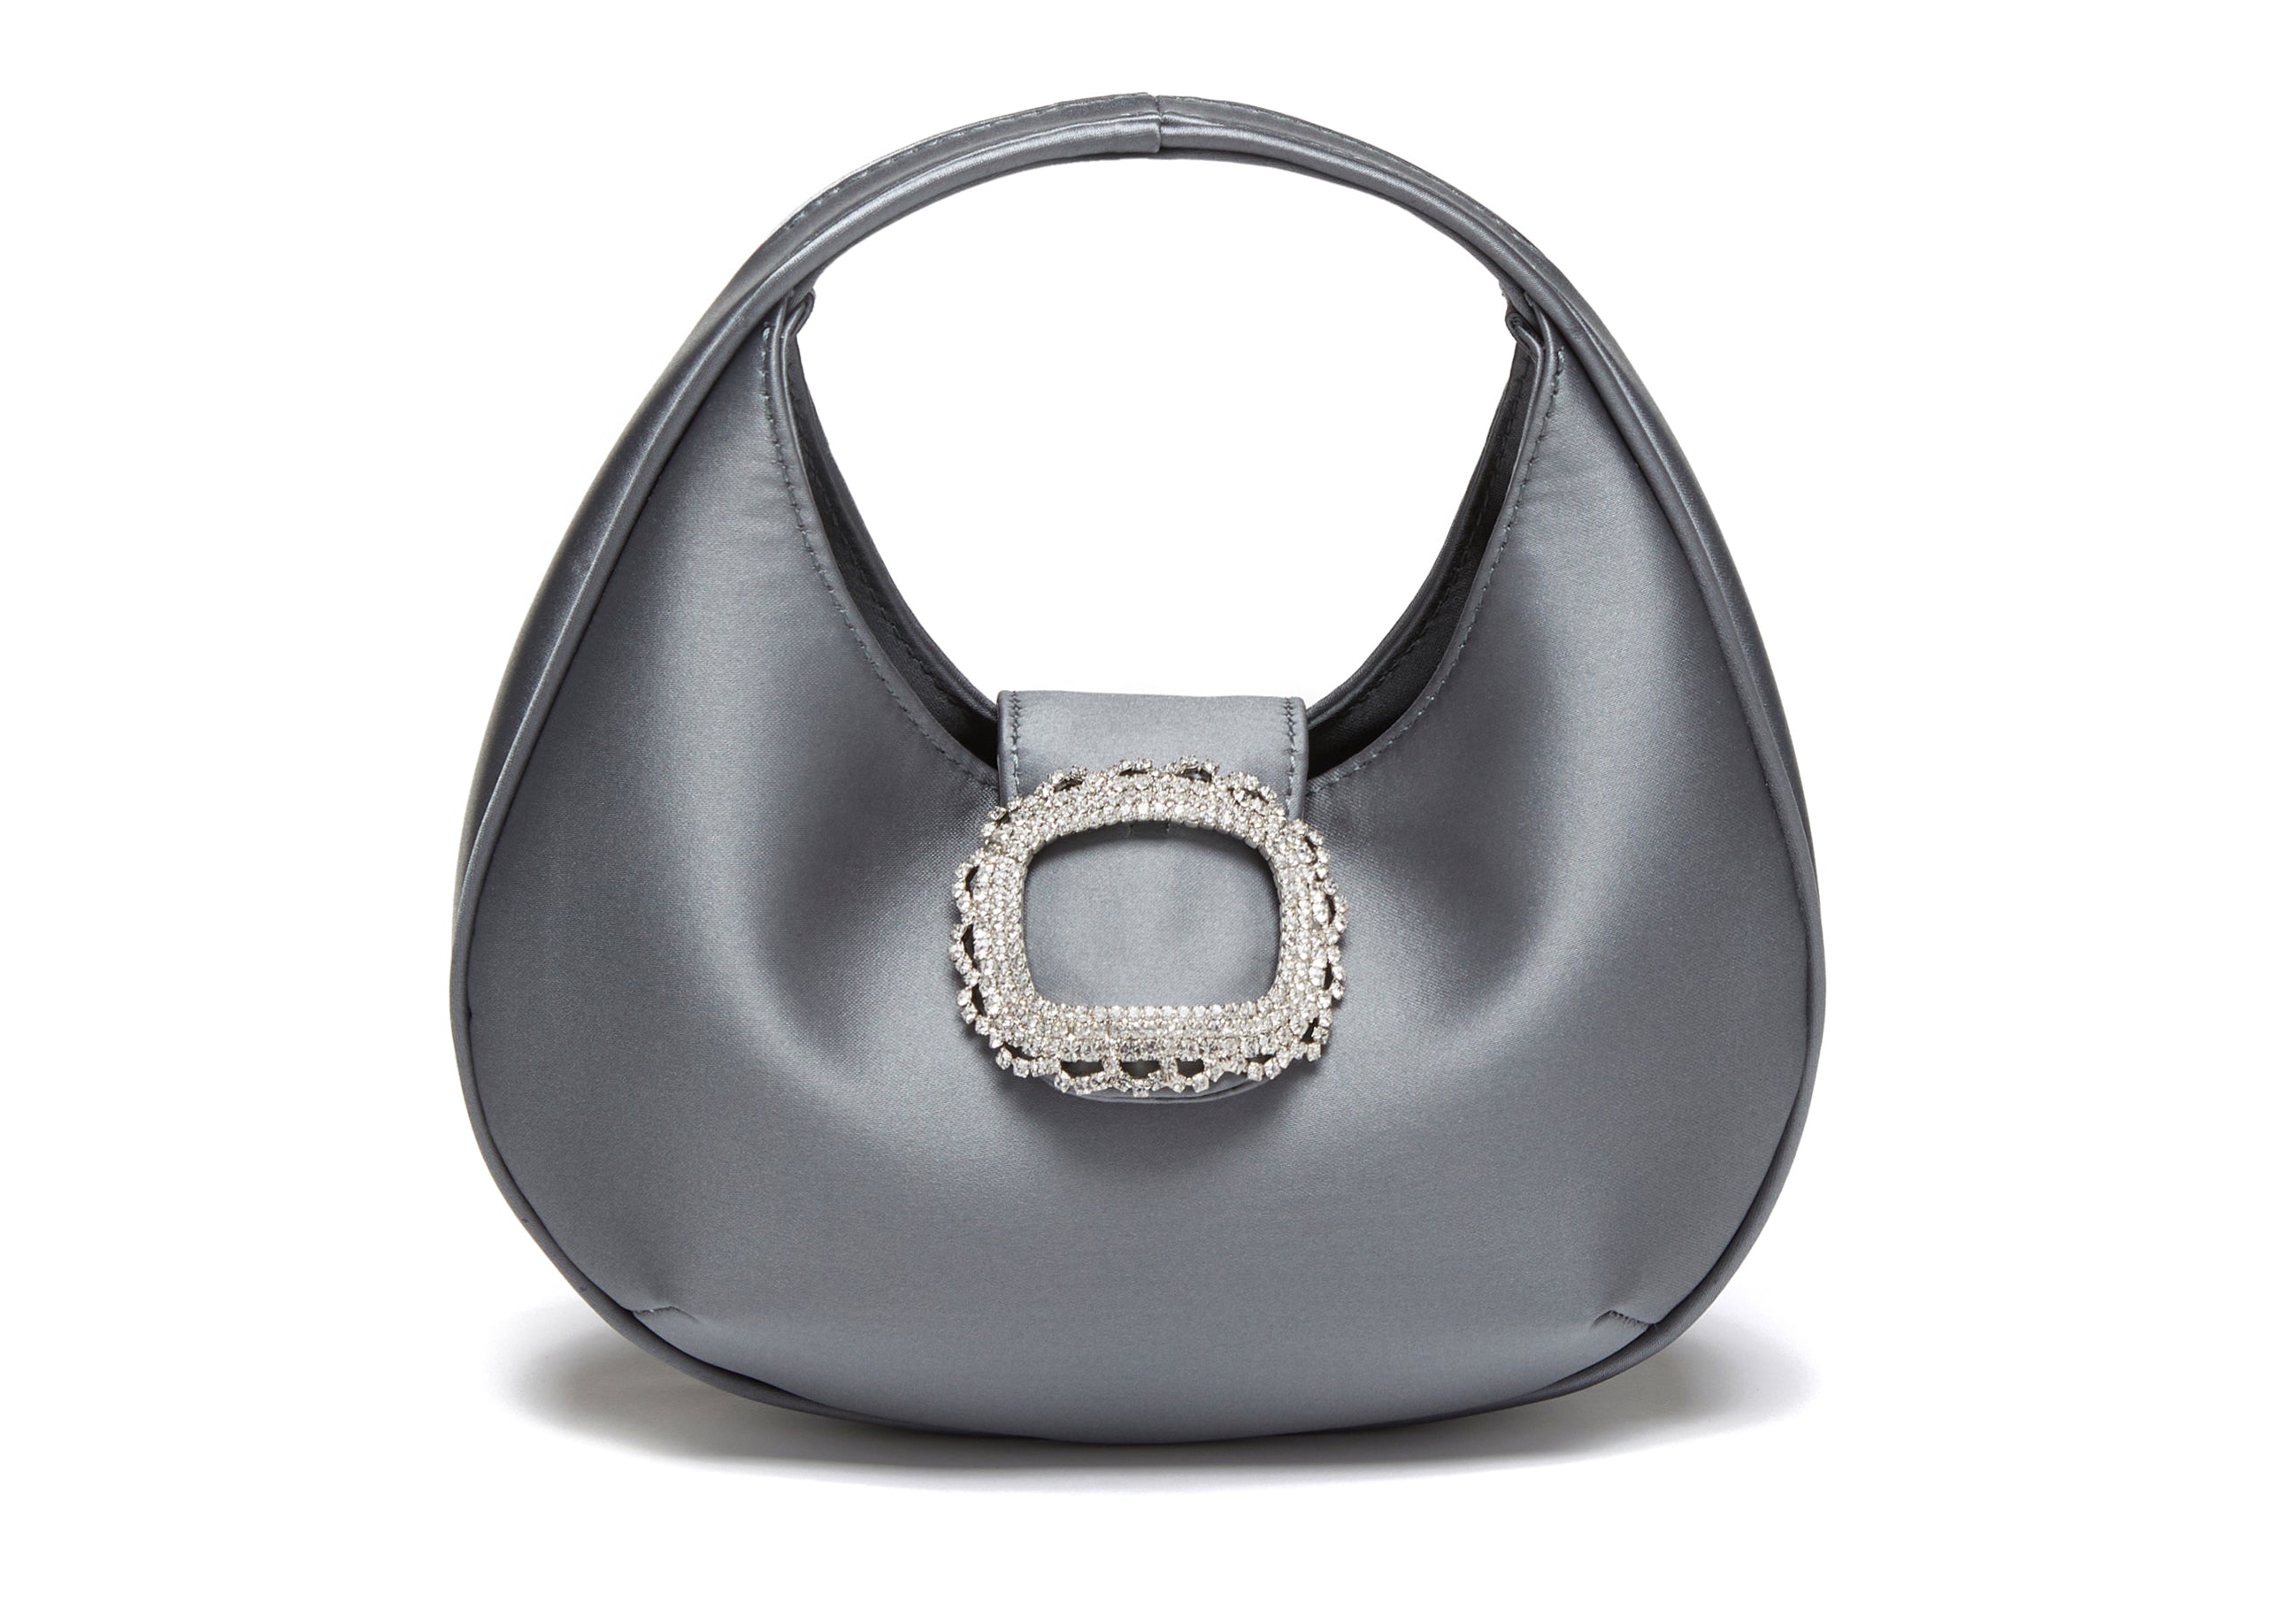 Mila Kate Milakate Embossed Shoulder Handbags with Inner Pouch for Women Designer Inspired Tote BAGS. Grey colour. Size: (13.5 x 6.5 X11.5), Women's